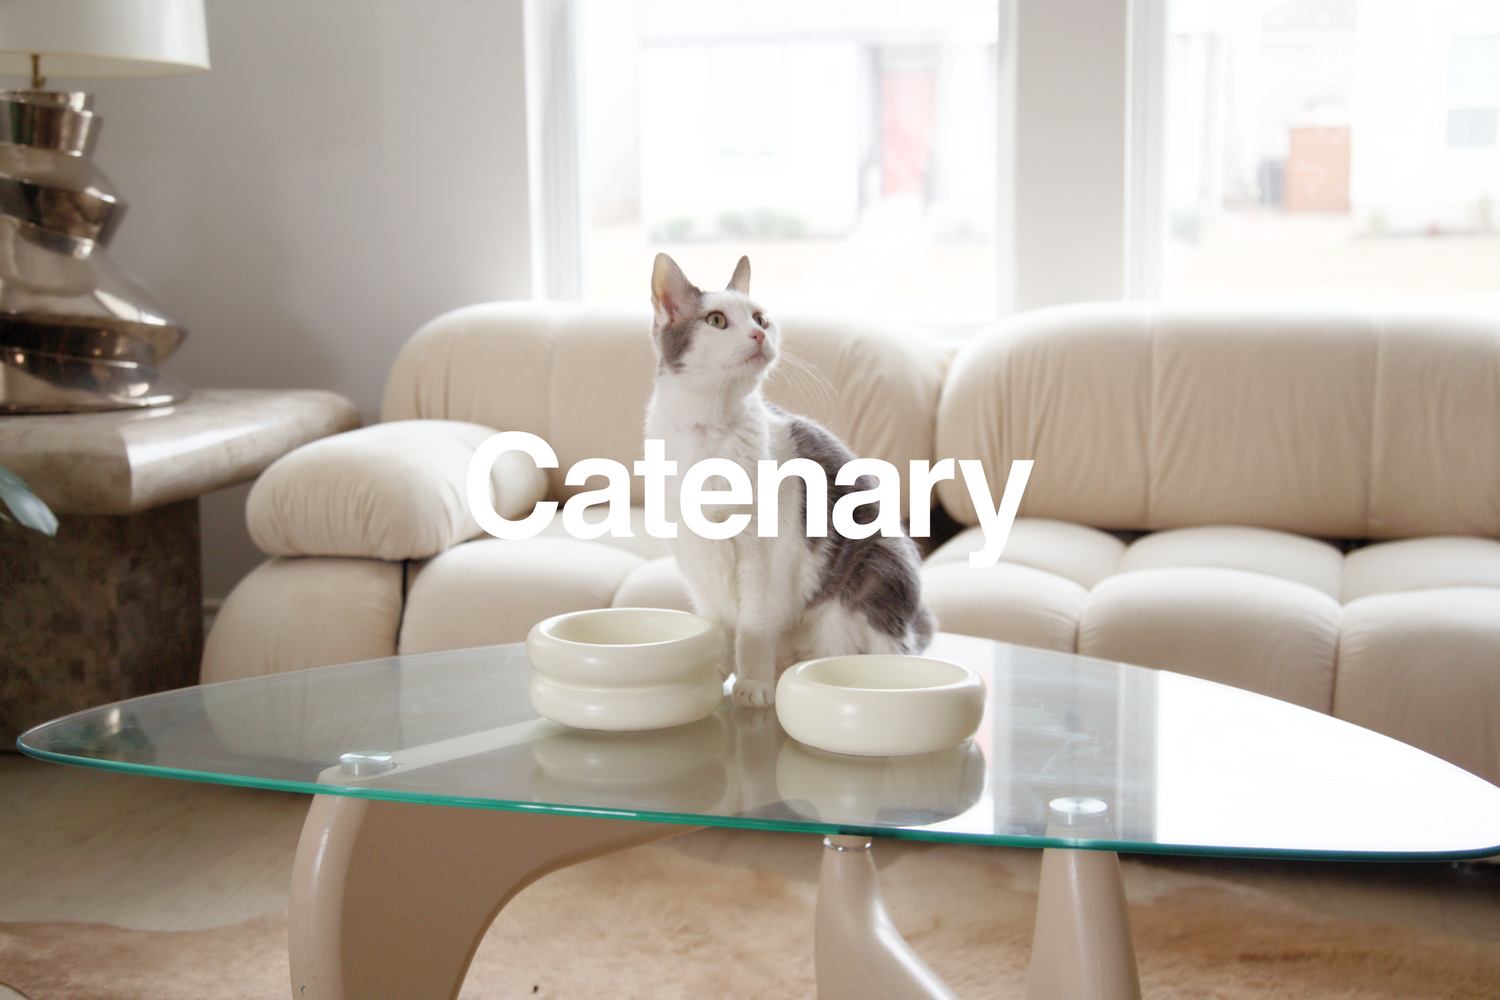 catenary cat in modern living room with modern cat furniture and modern cat bowls that prevent whisker fatigue